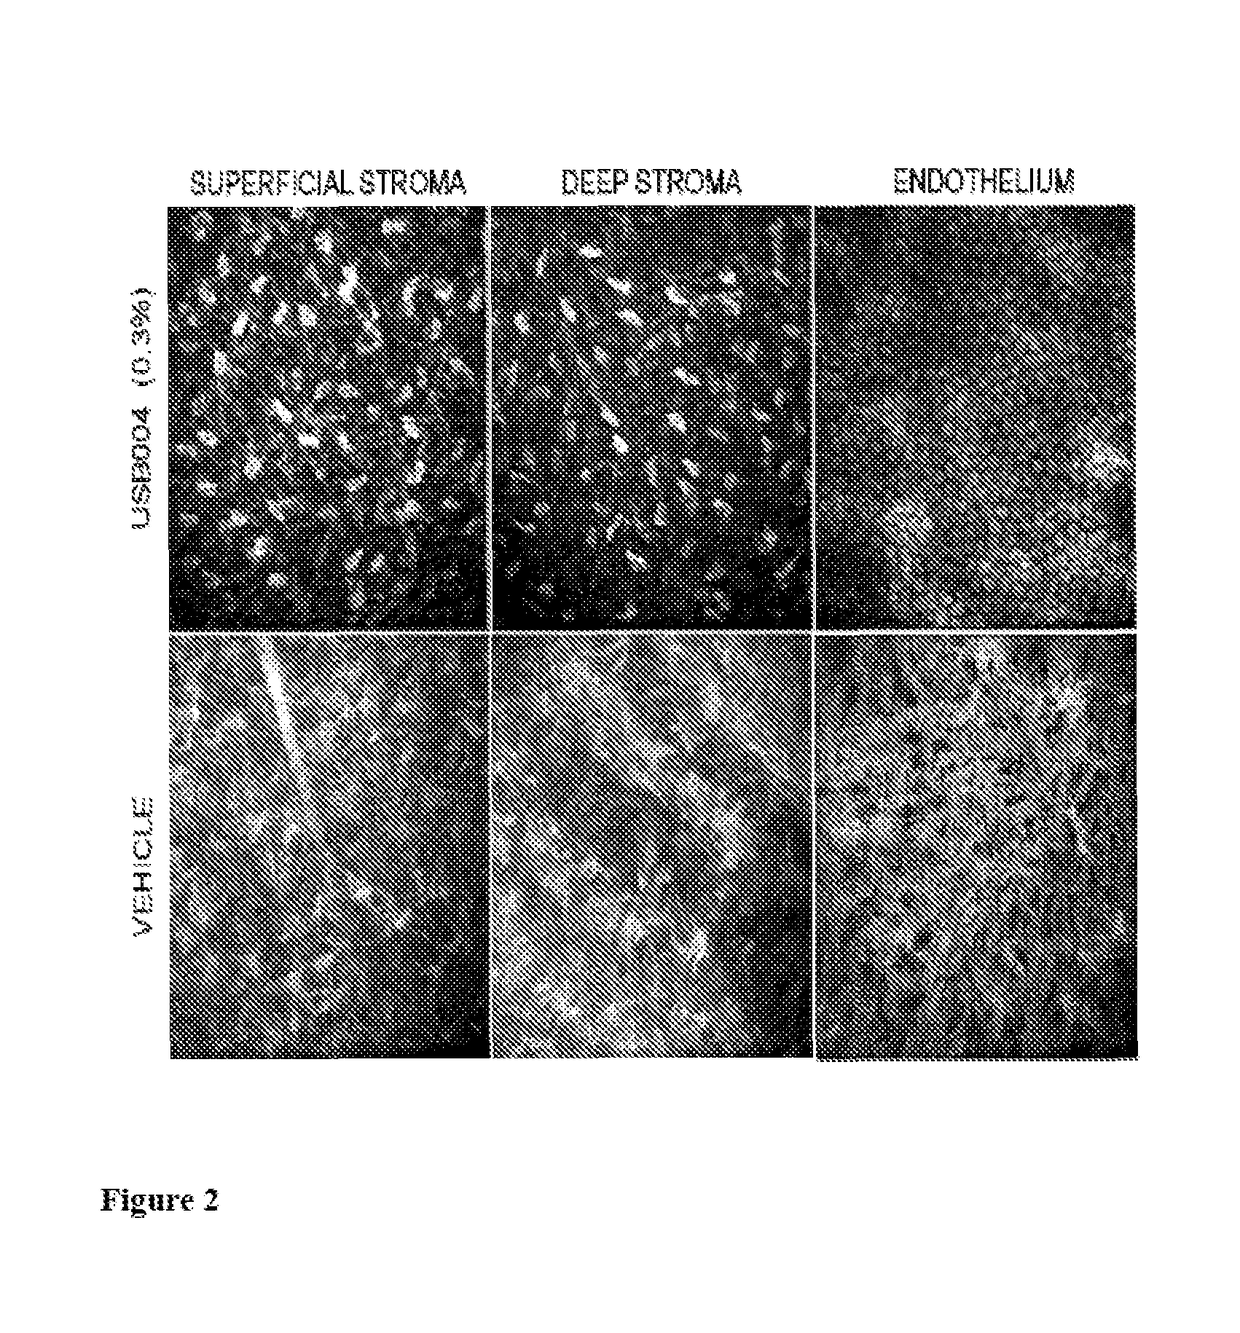 Accelerated healing of eye injuries by angiotensin peptides